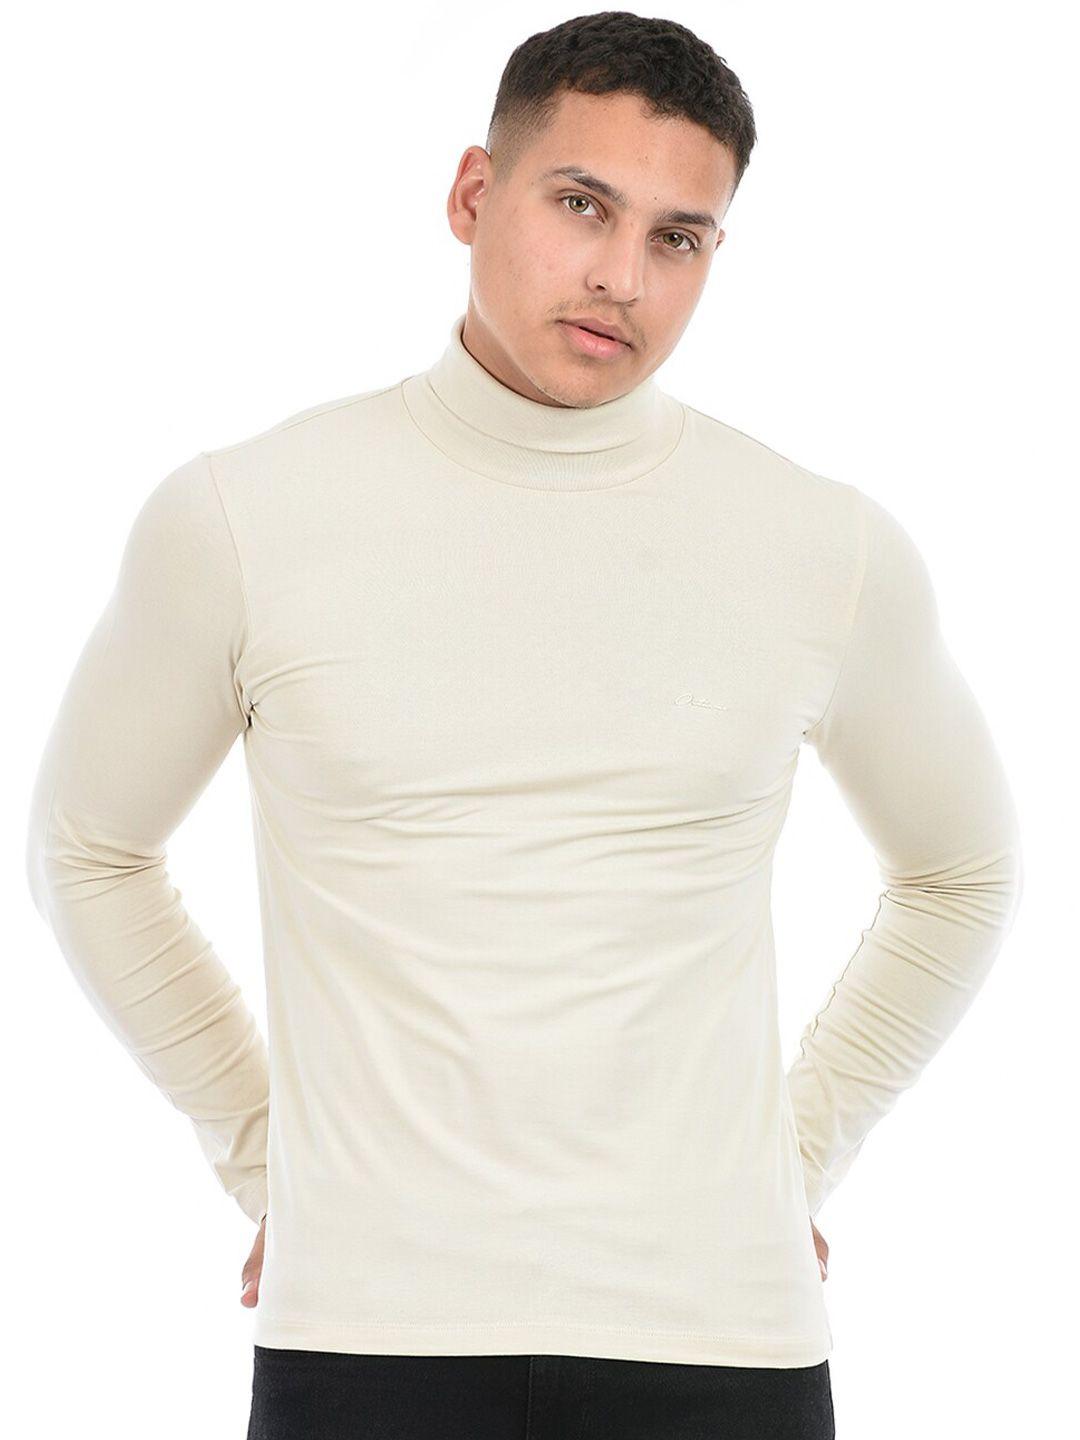 octave high neck long sleeves casual t-shirt